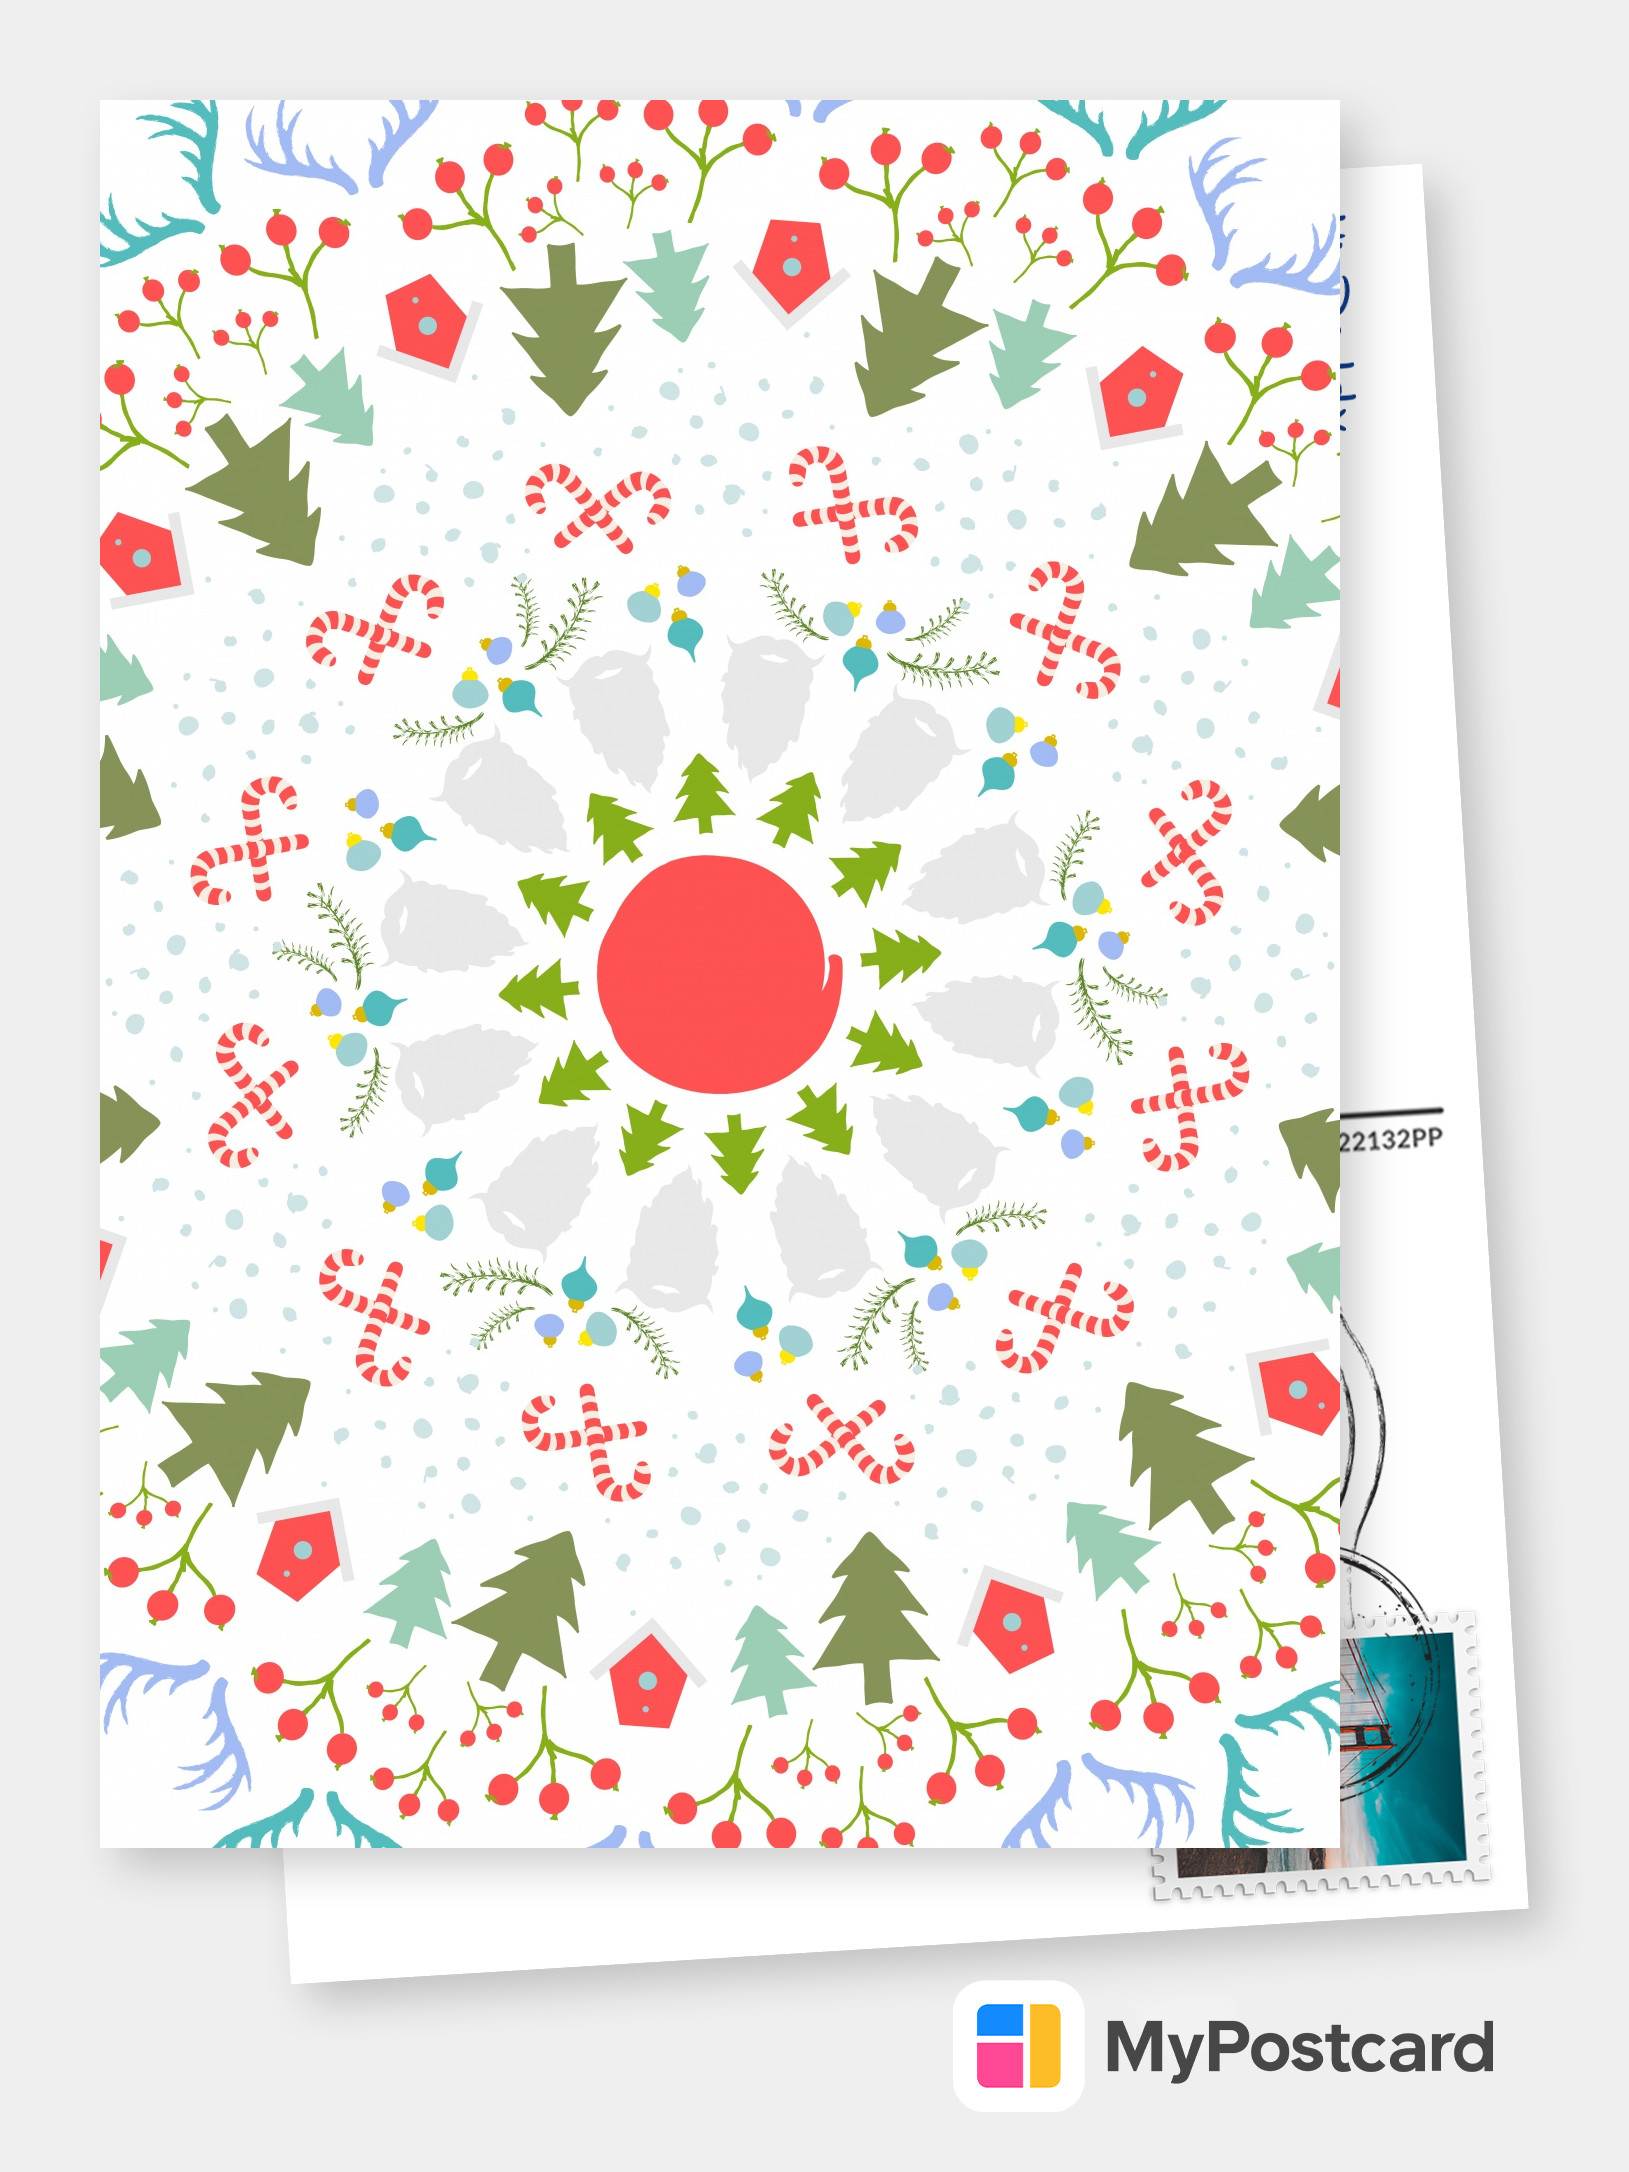 Free Printable Christmas Cards Templates  Print and Mailed For You Online   Printed Christmas Cards  We print your Christmas Cards and mail them Pertaining To Print Your Own Christmas Cards Templates